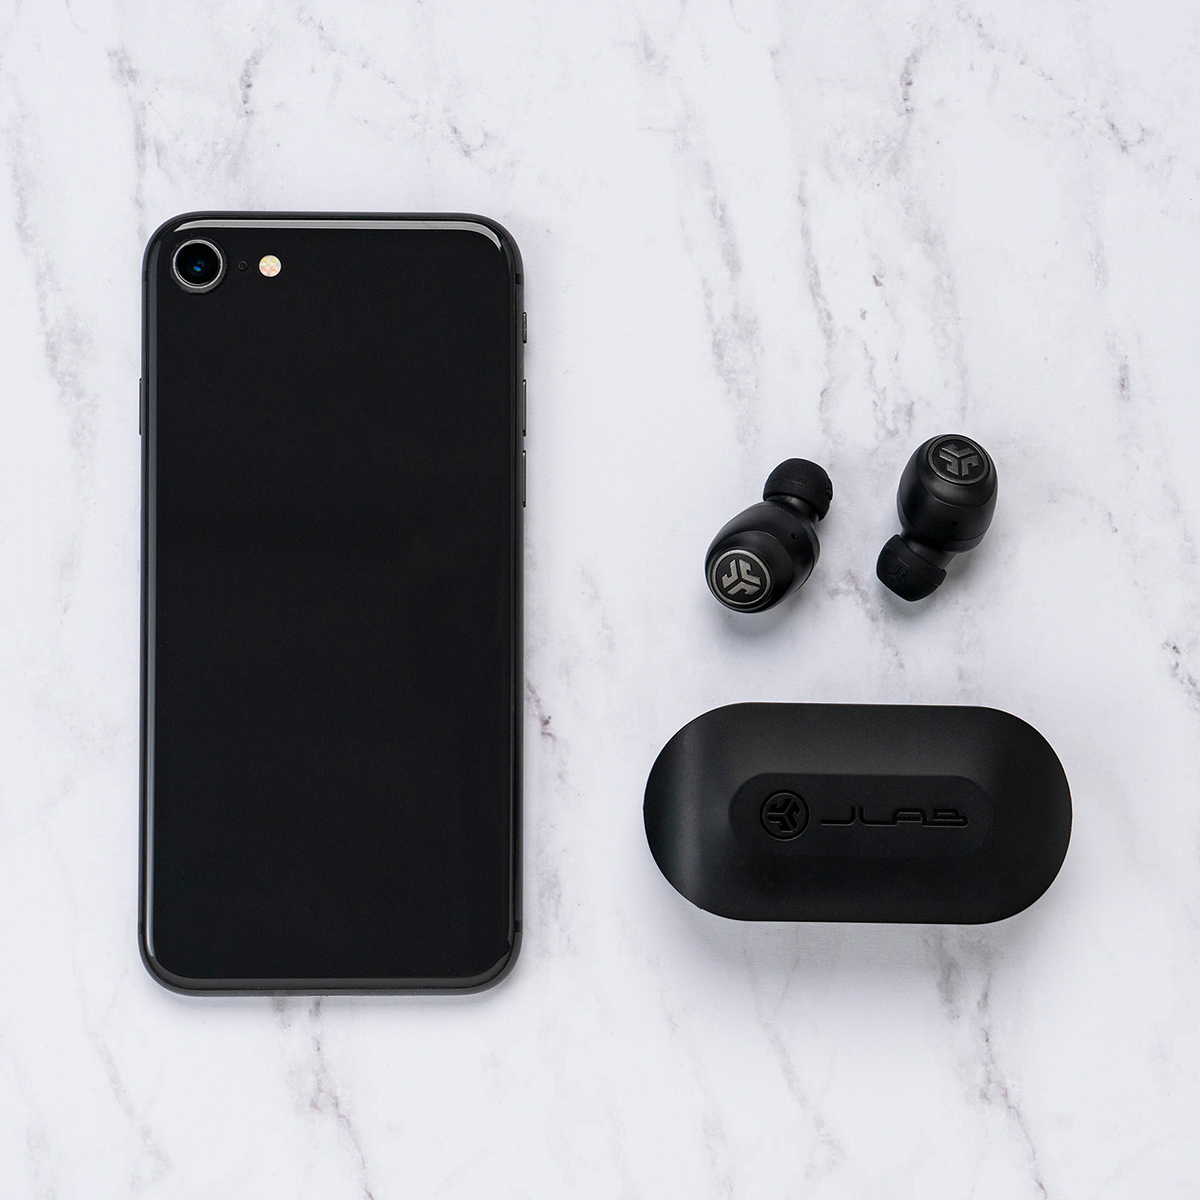 GO Air True Wireless Earbuds - Black - image 3 of 3